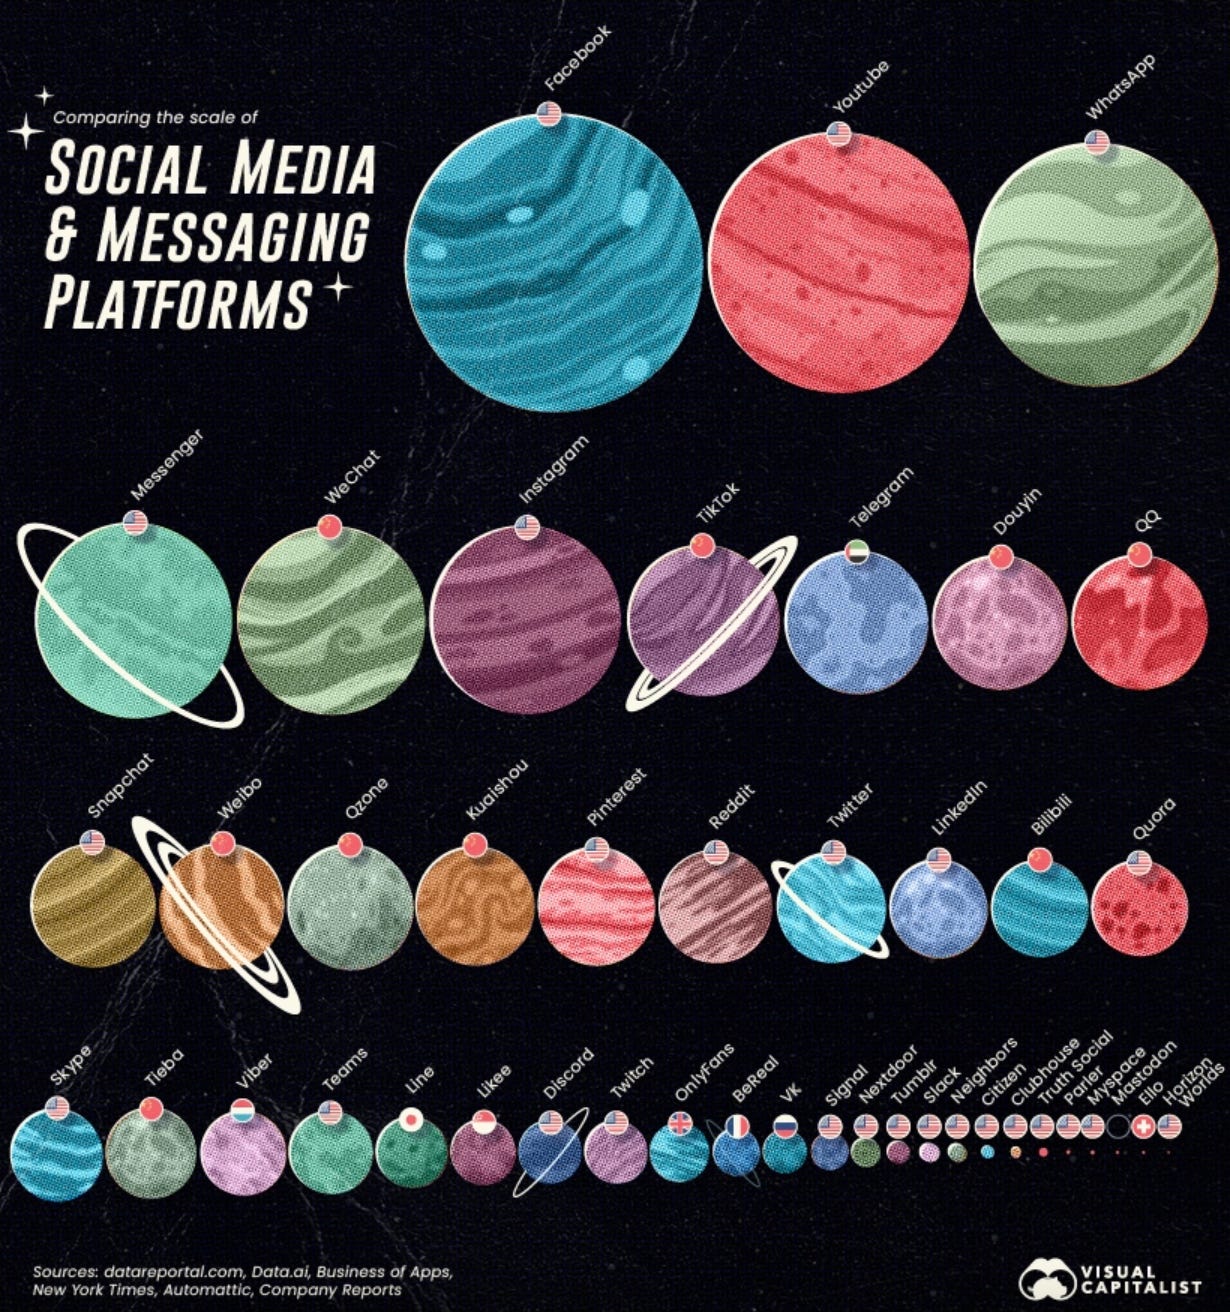 Social media and messaging platforms from Visual Capitalist